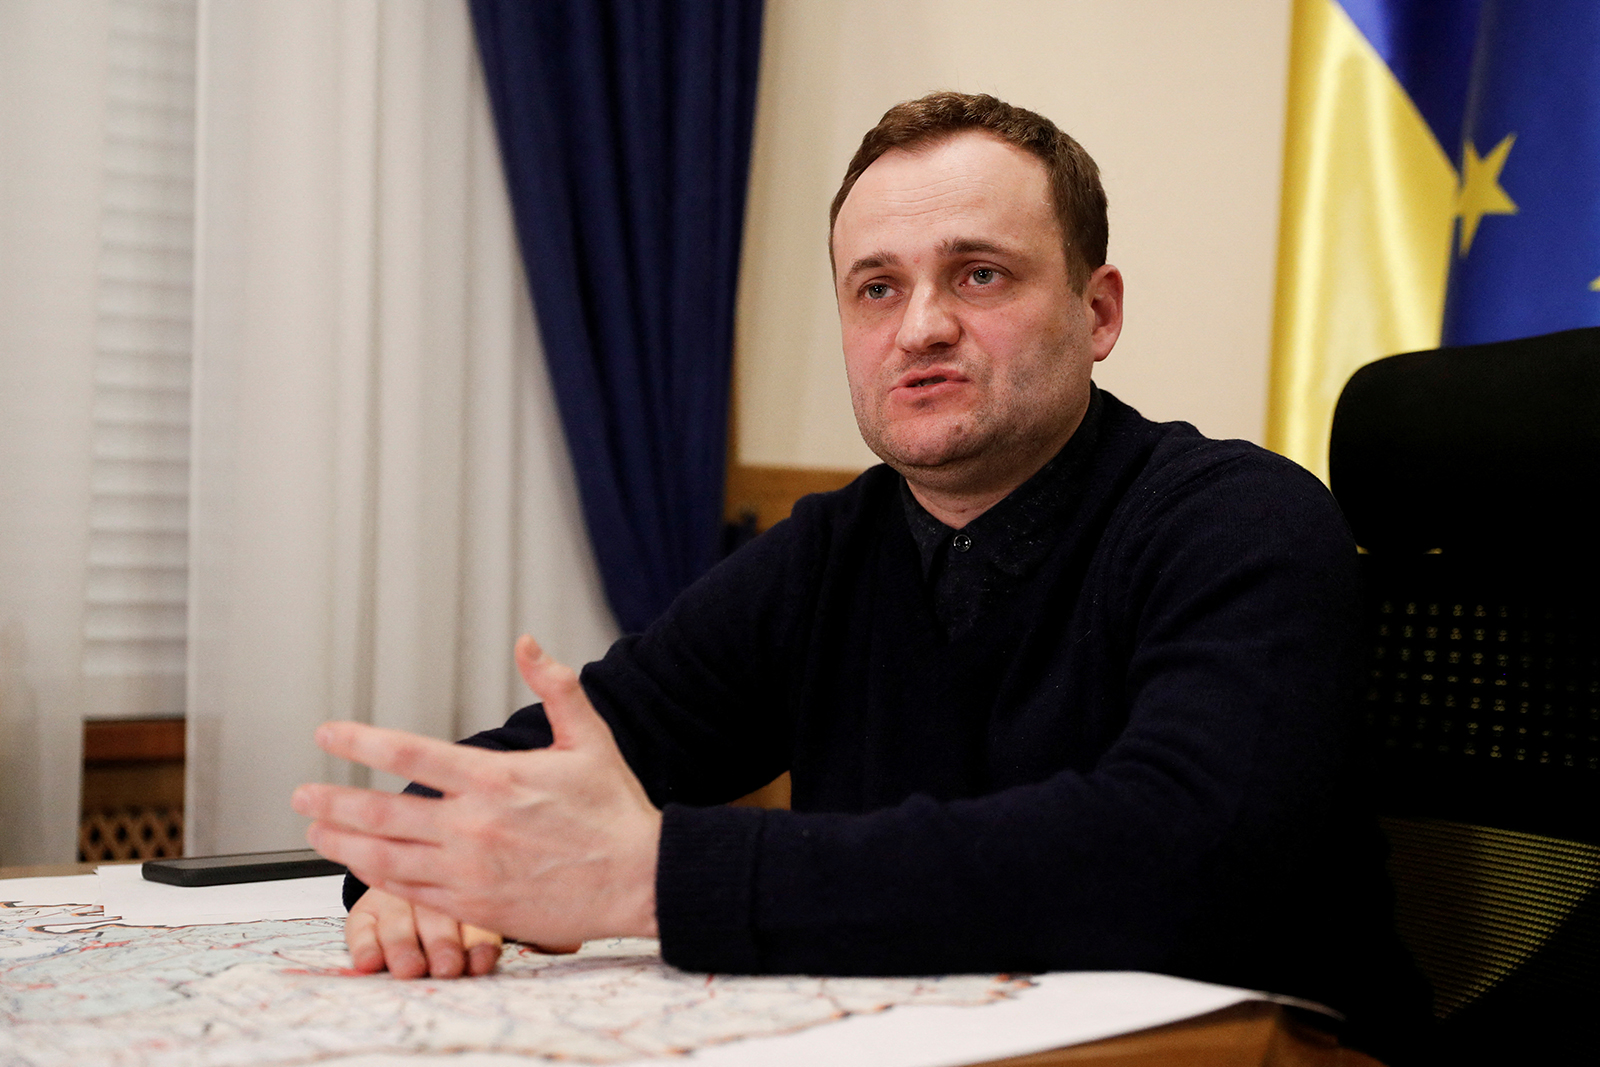 Governor of the Kyiv region, Oleksiy Kuleba, speaks during an interview in Kyiv on March 8.